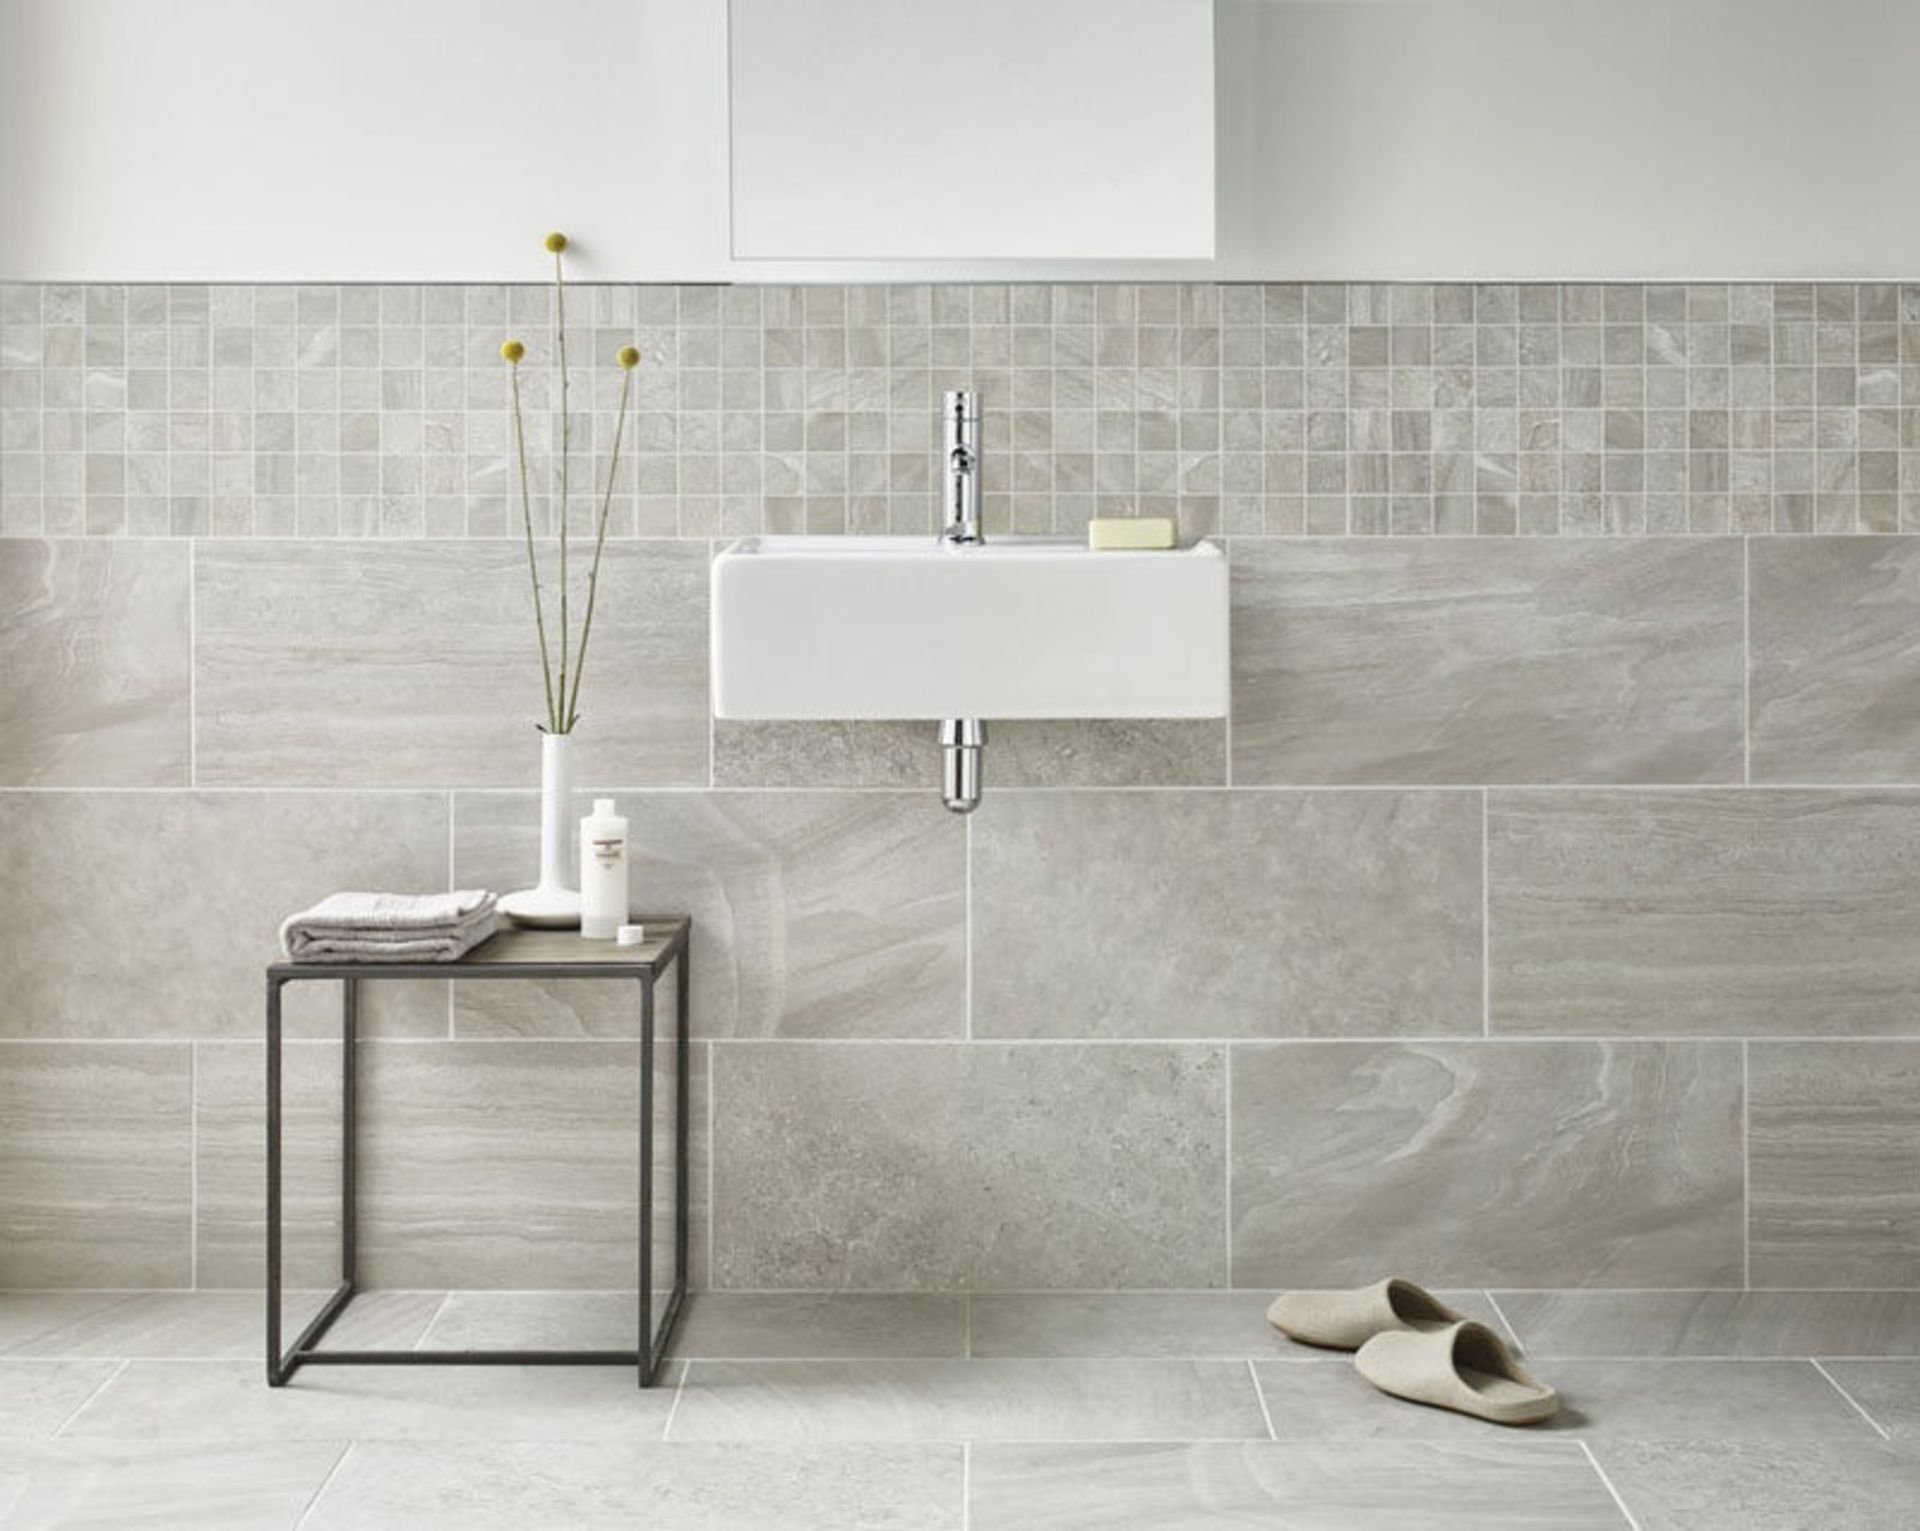 NEW 5.4m2 Bloomsbury Brook Edge Lapatto Beige Wall and Floor Tiles. 300x600mm per tile, 8.3mm ...